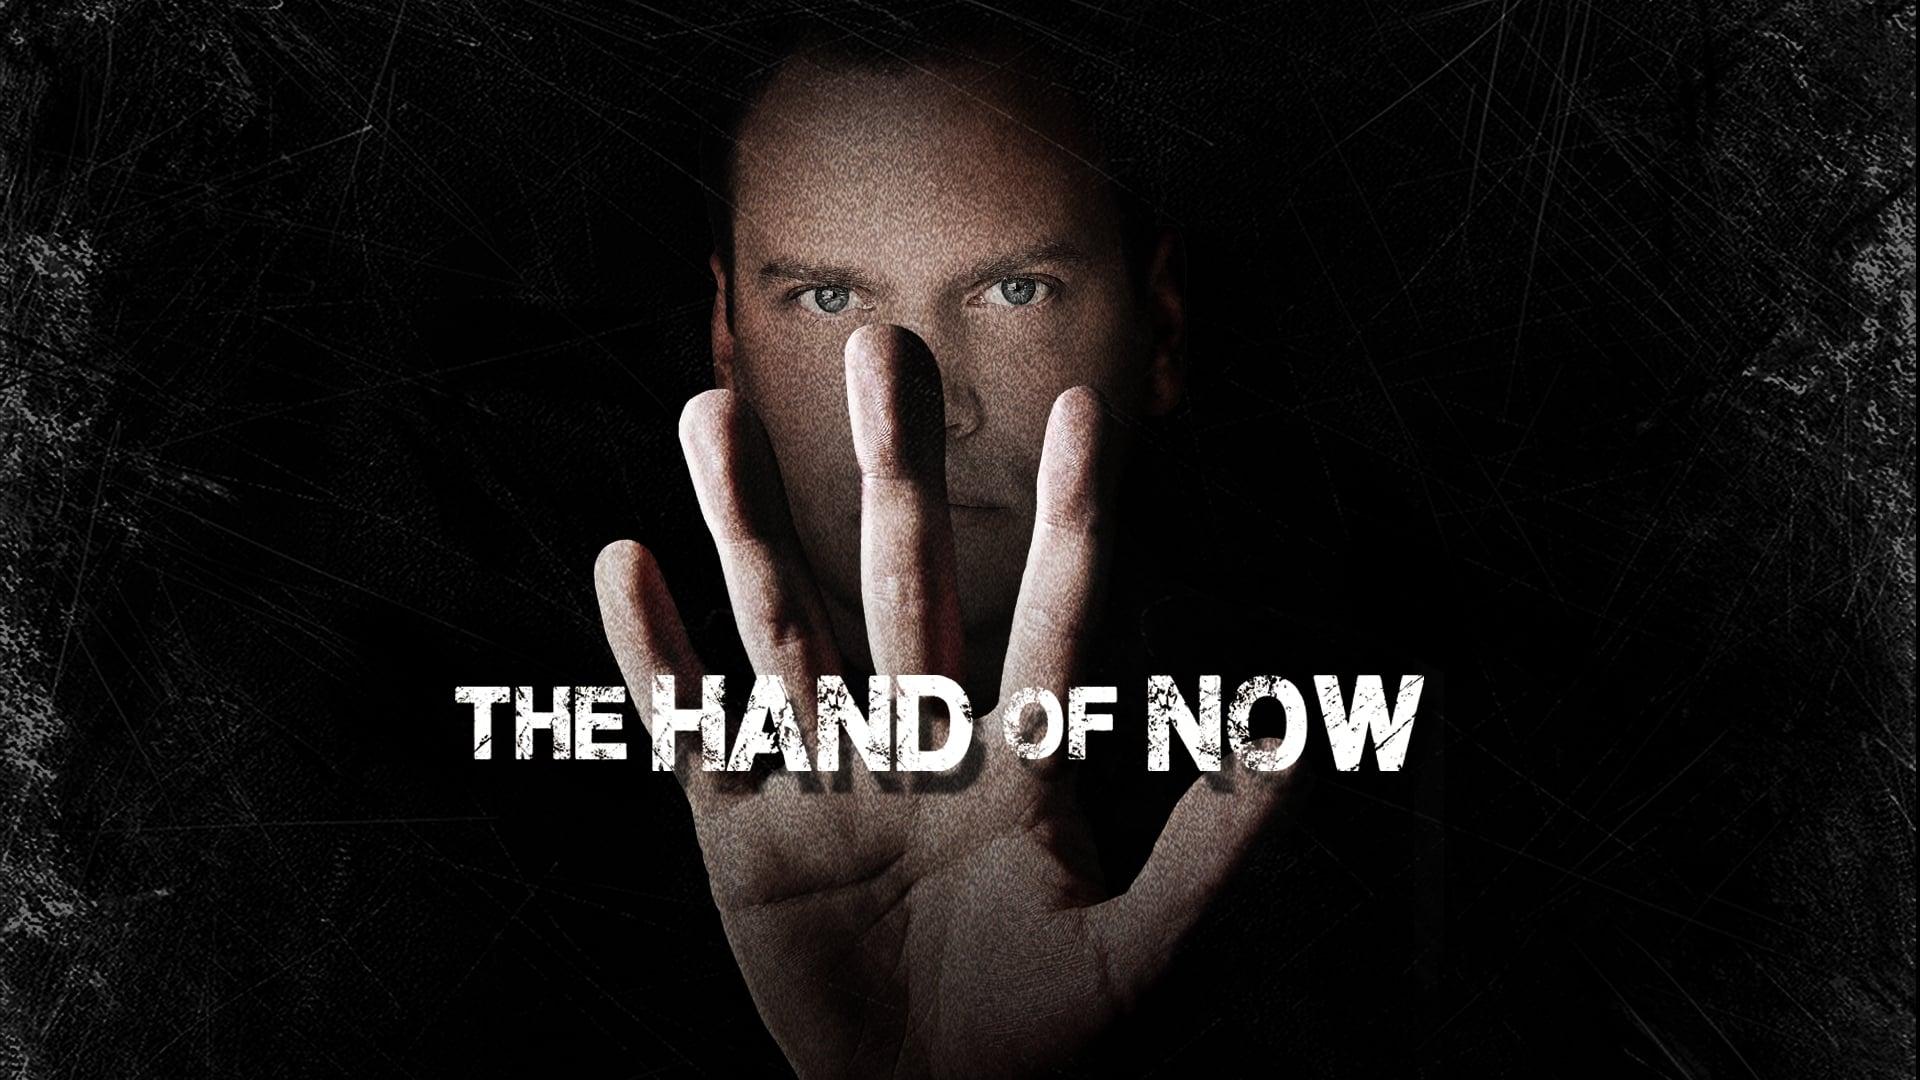 The Hand of Now backdrop